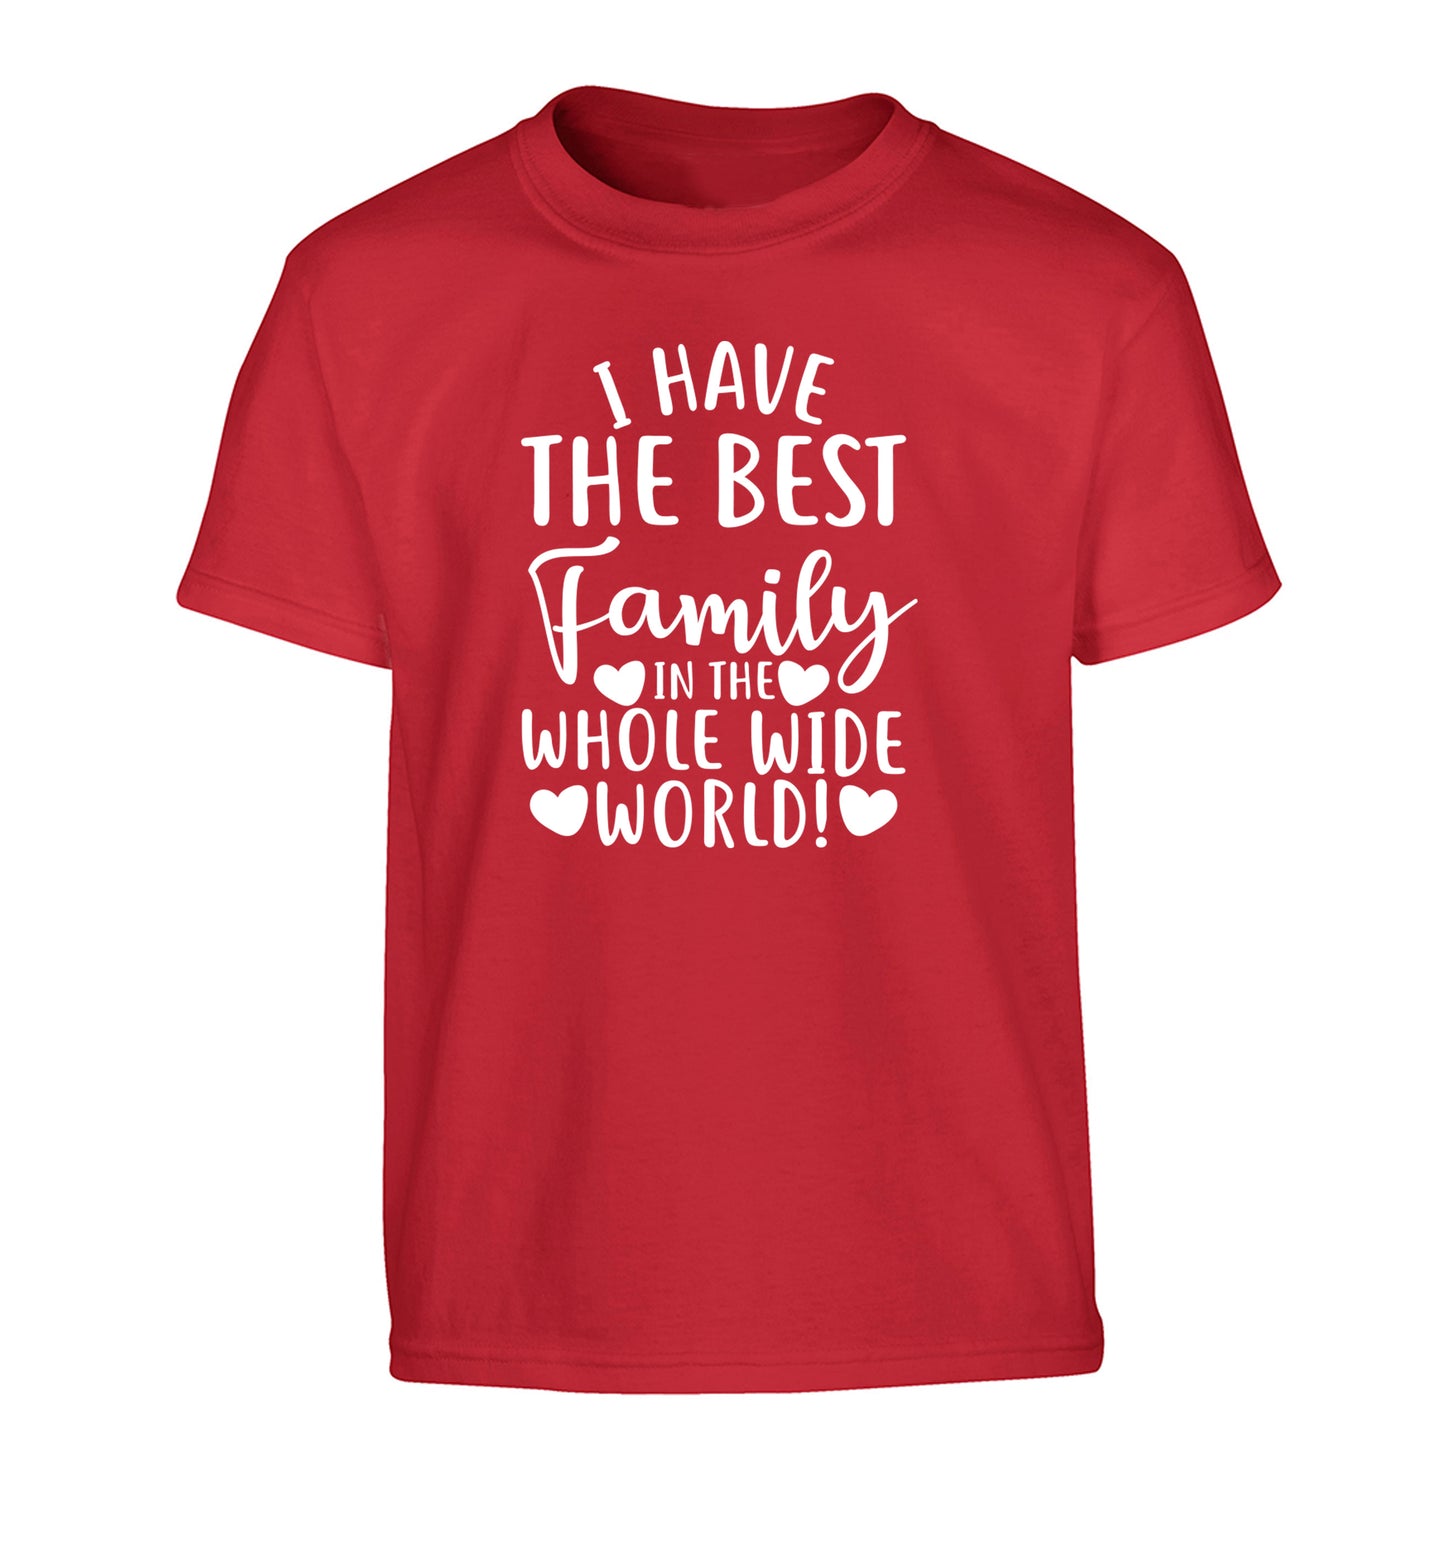 I have the best family in the whole wide world! Children's red Tshirt 12-13 Years